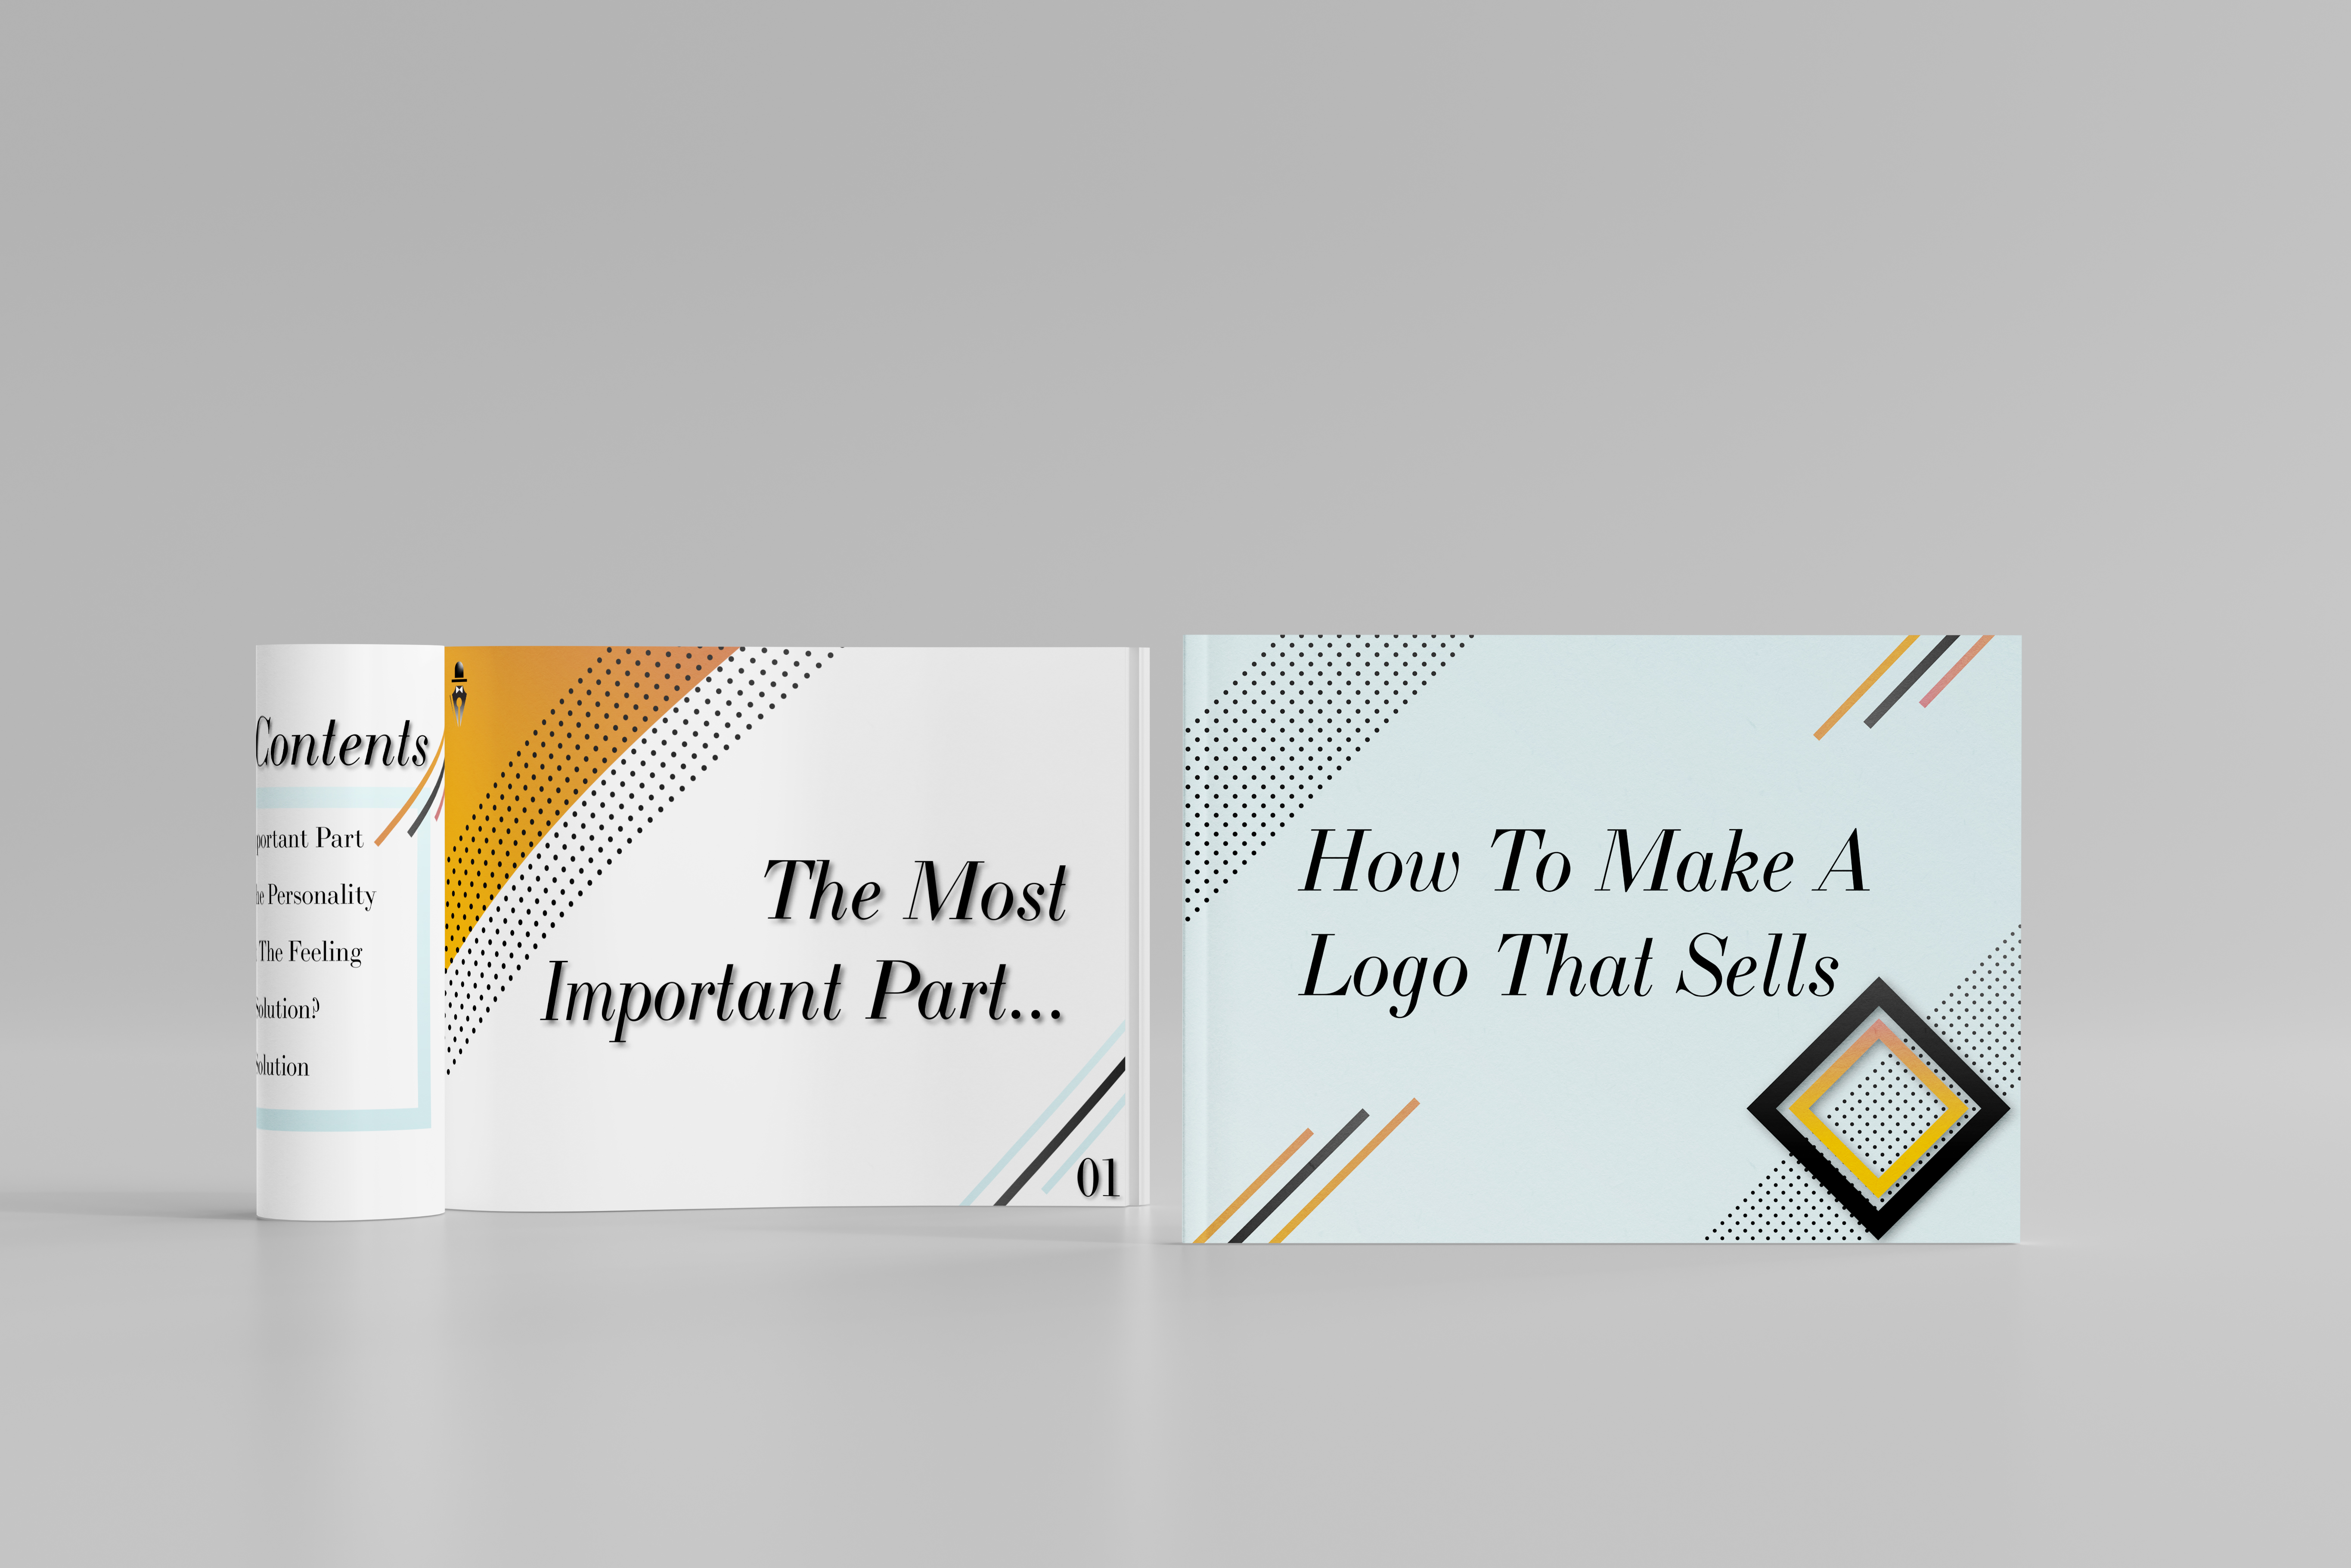 How To Make a Logo That Sells